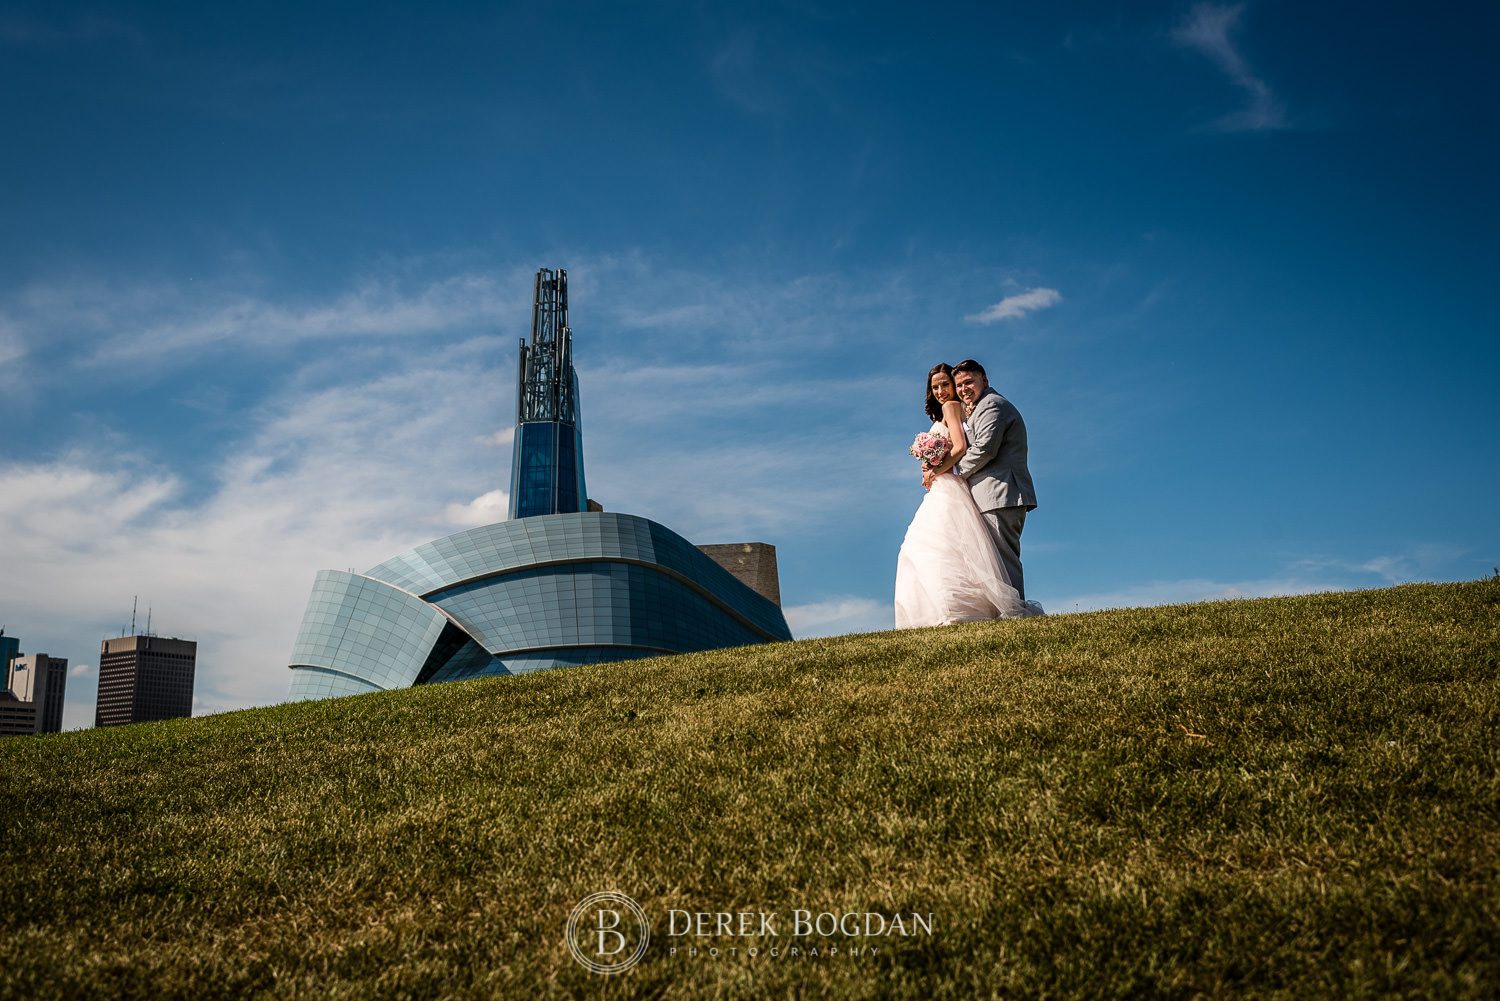 Bride and groom outdoor wedding portrait The forks Winnipeg Human Rights museum